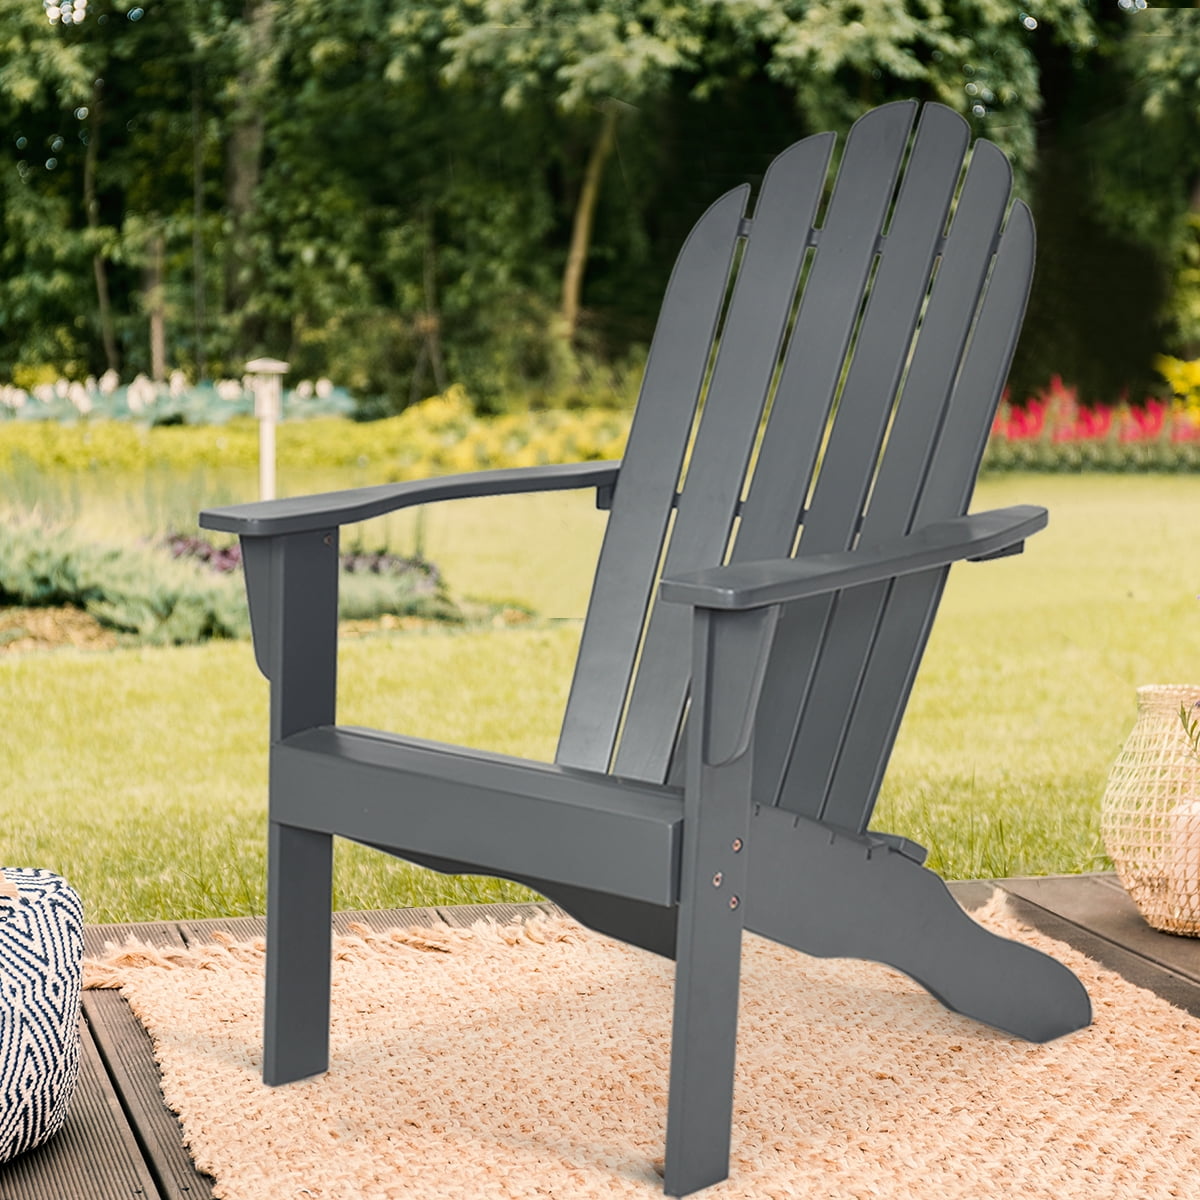 Costway Outdoor Adirondack Chair Accent Chair Solid Wood Durable Patio Garden Deck Furniture Gray